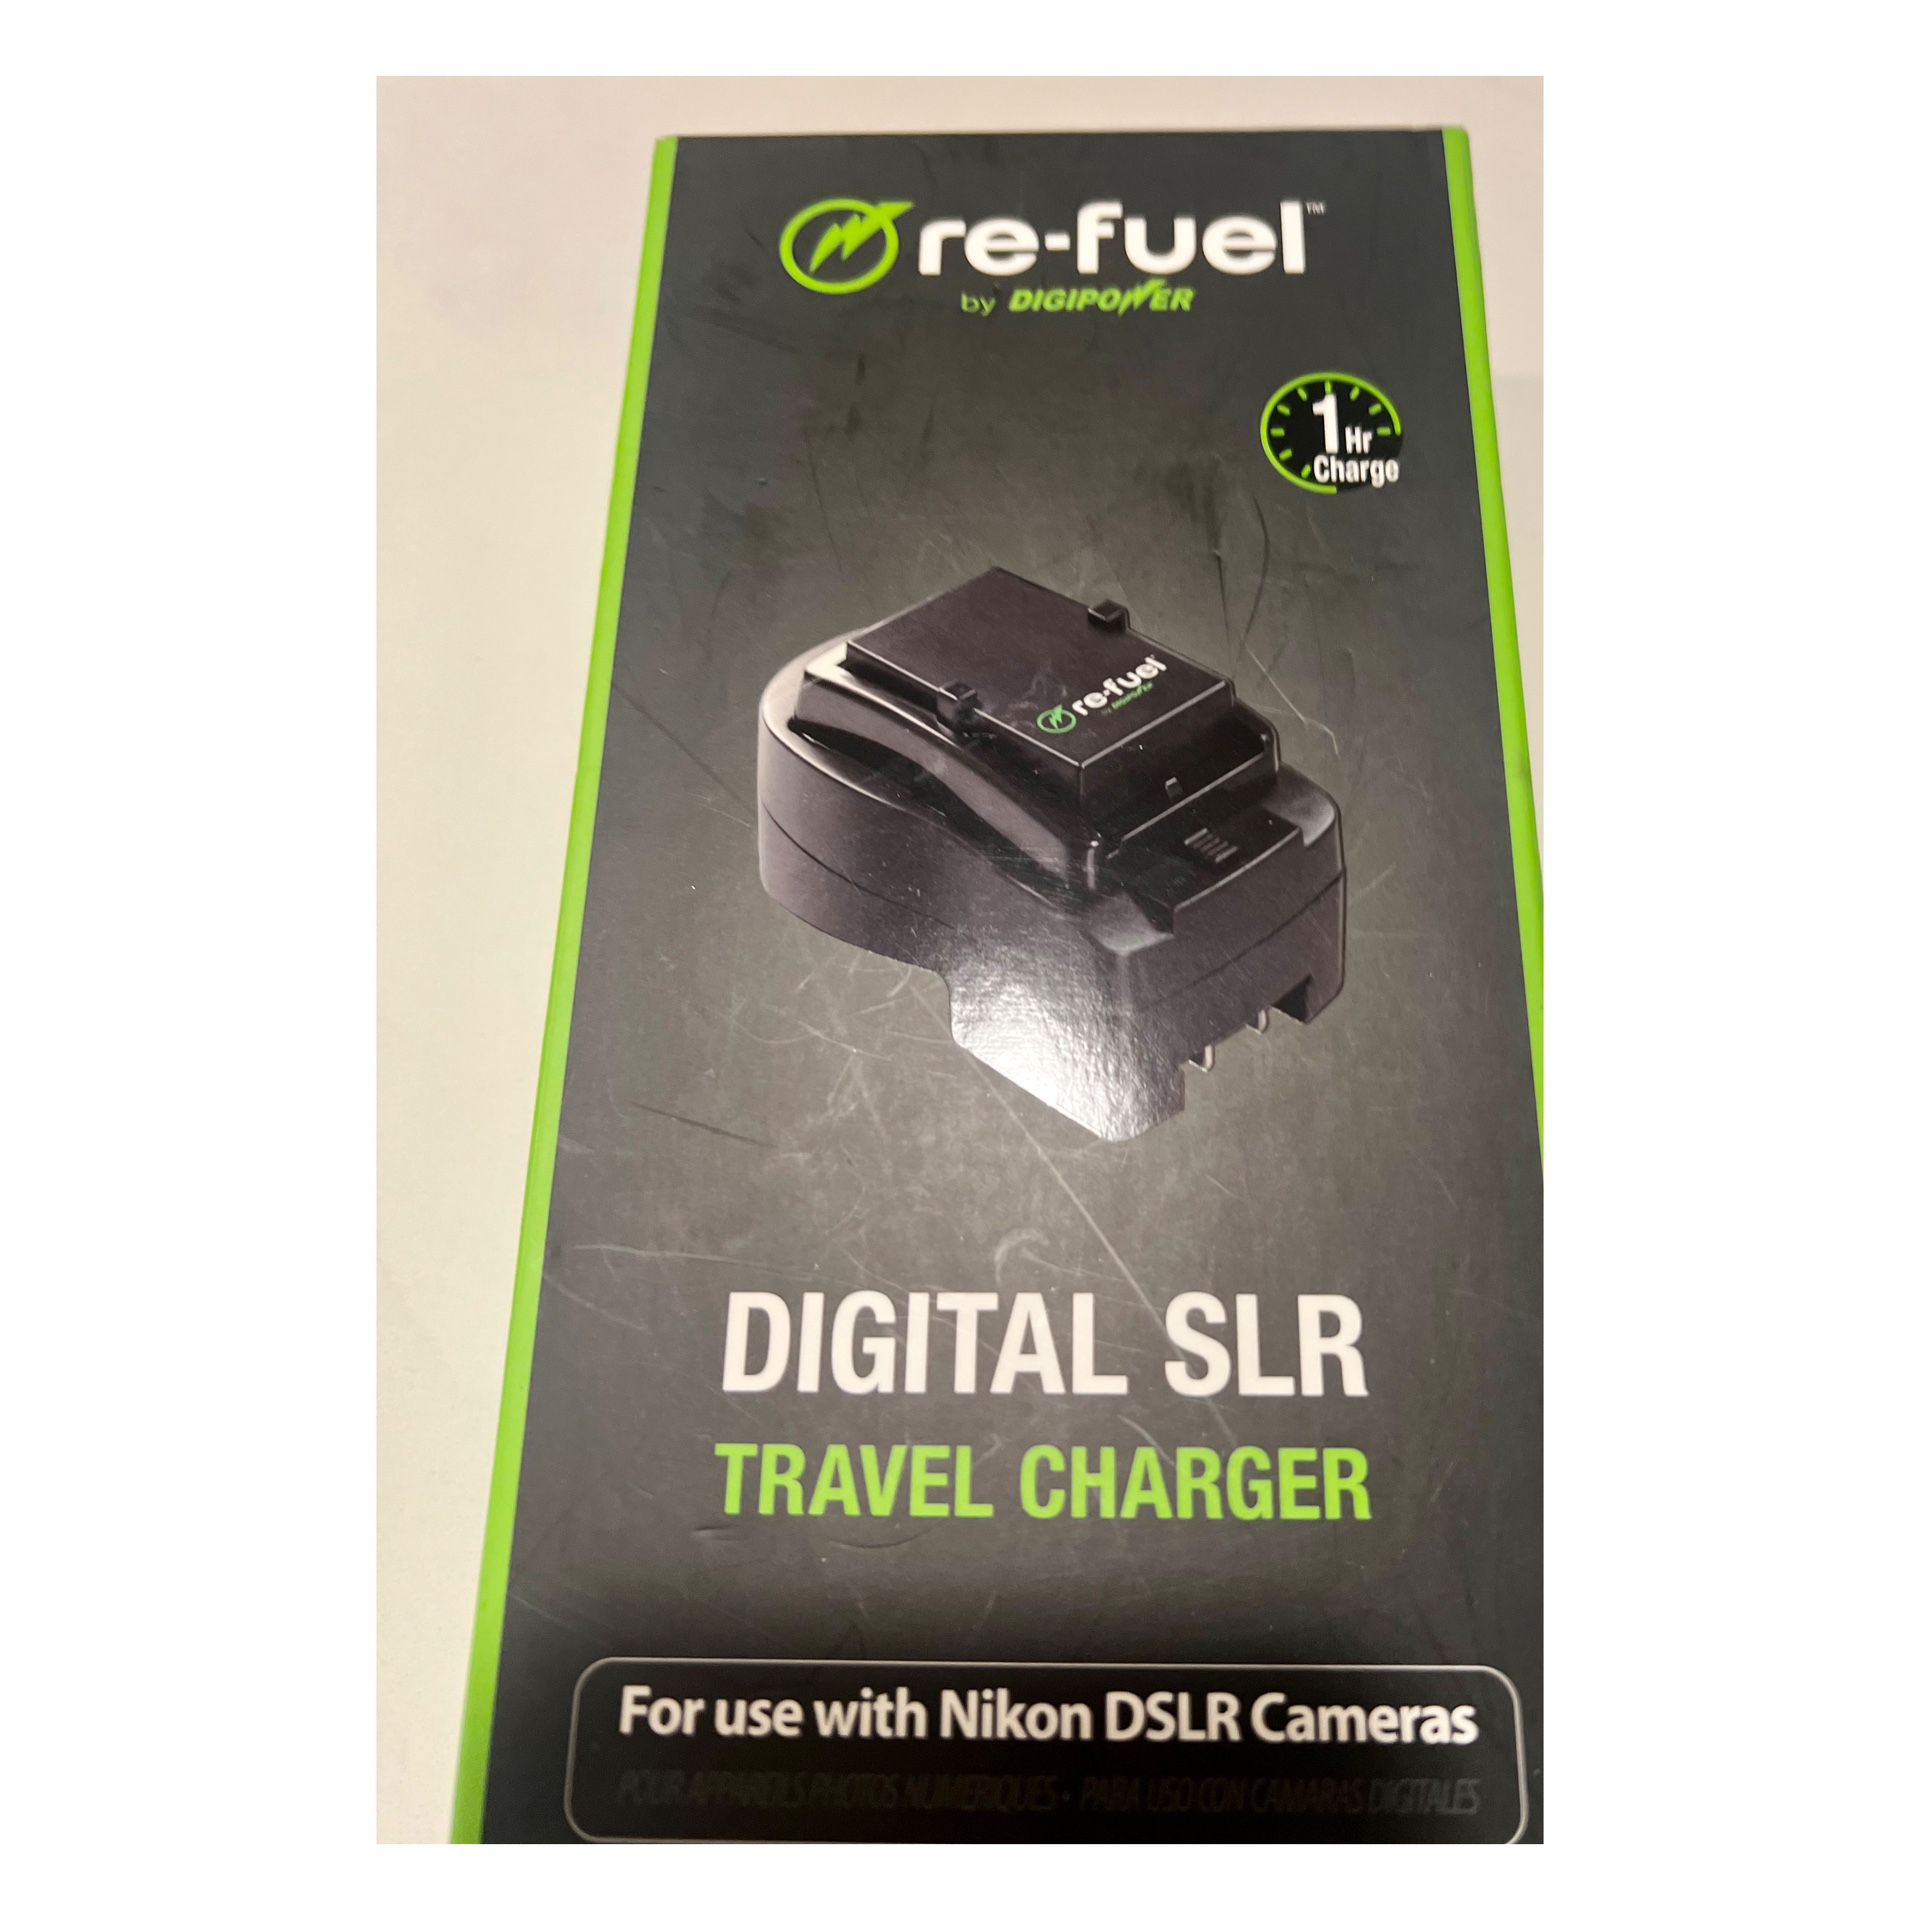 Re-Fuel by DIGIPOWER Digital SLR Travel Charger for use with Nikon DSLR Cameras